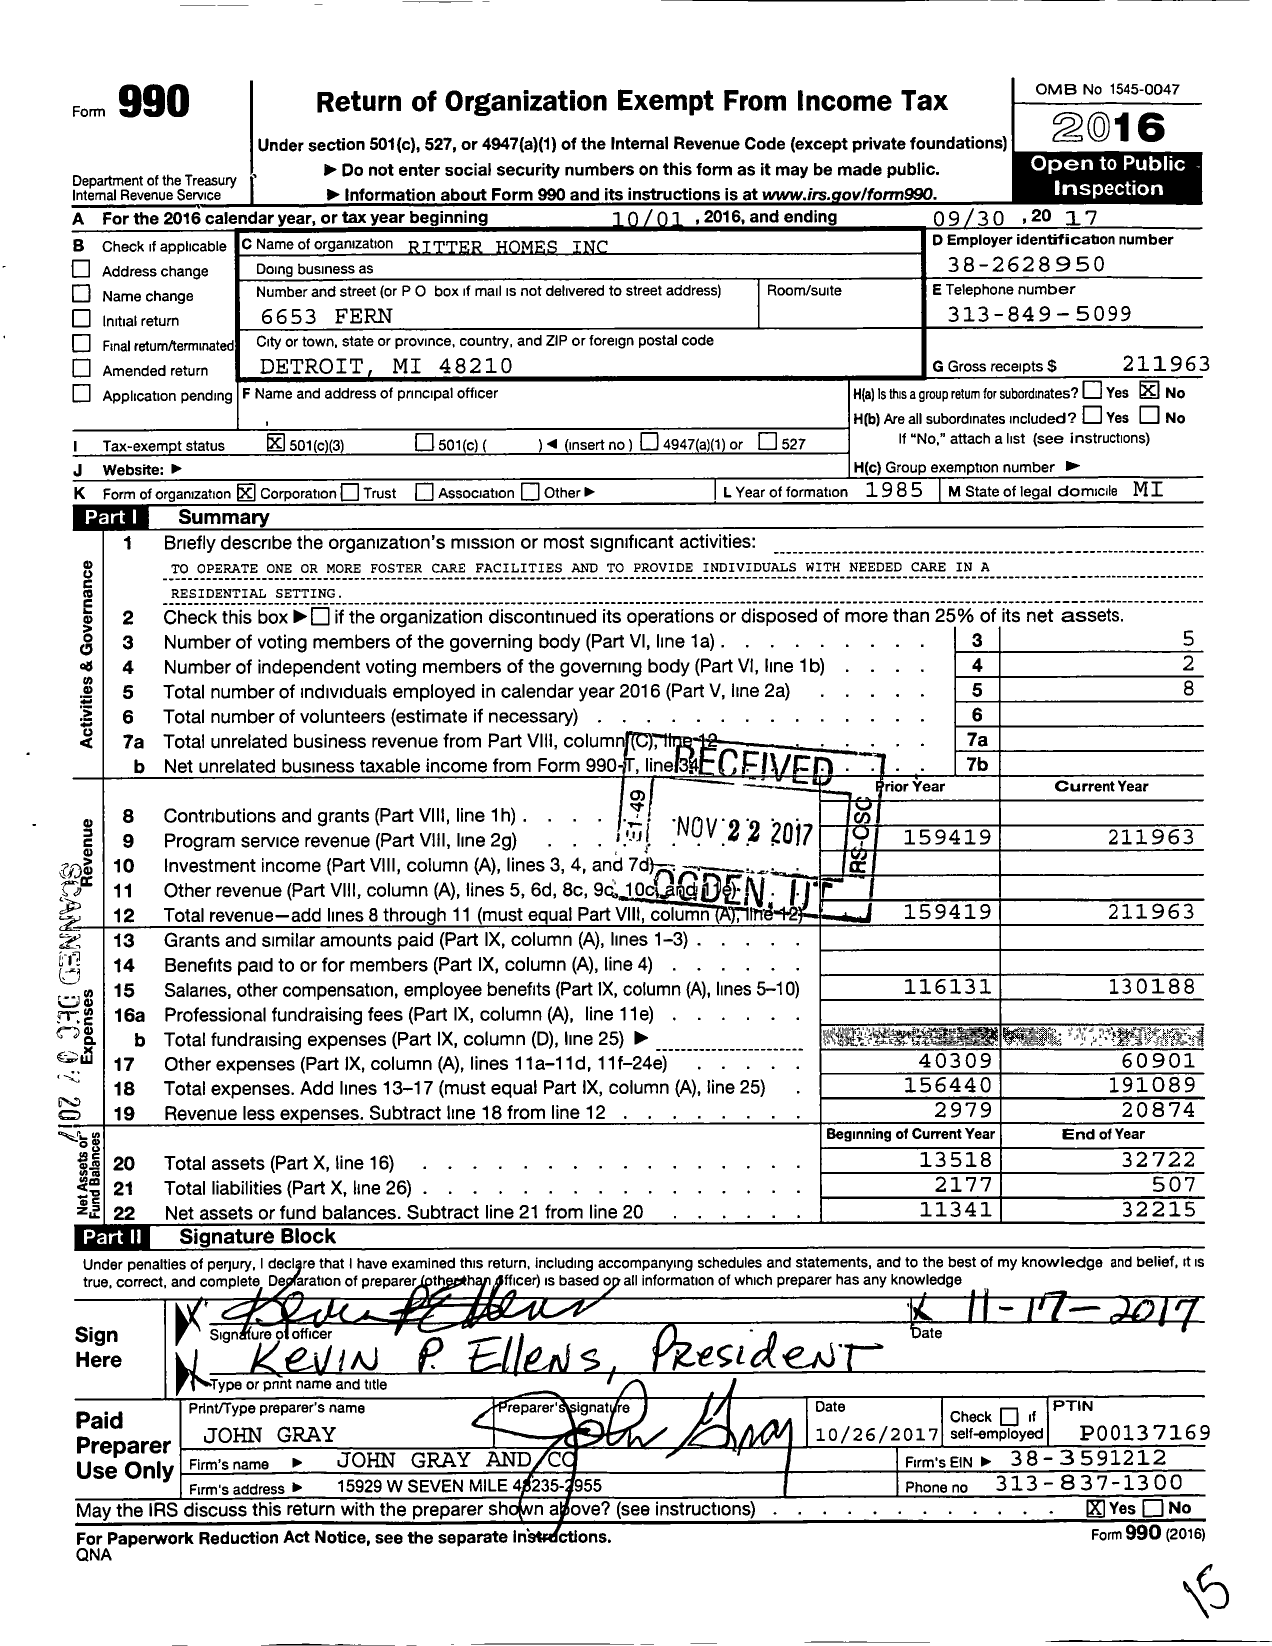 Image of first page of 2016 Form 990 for Ritter Homes